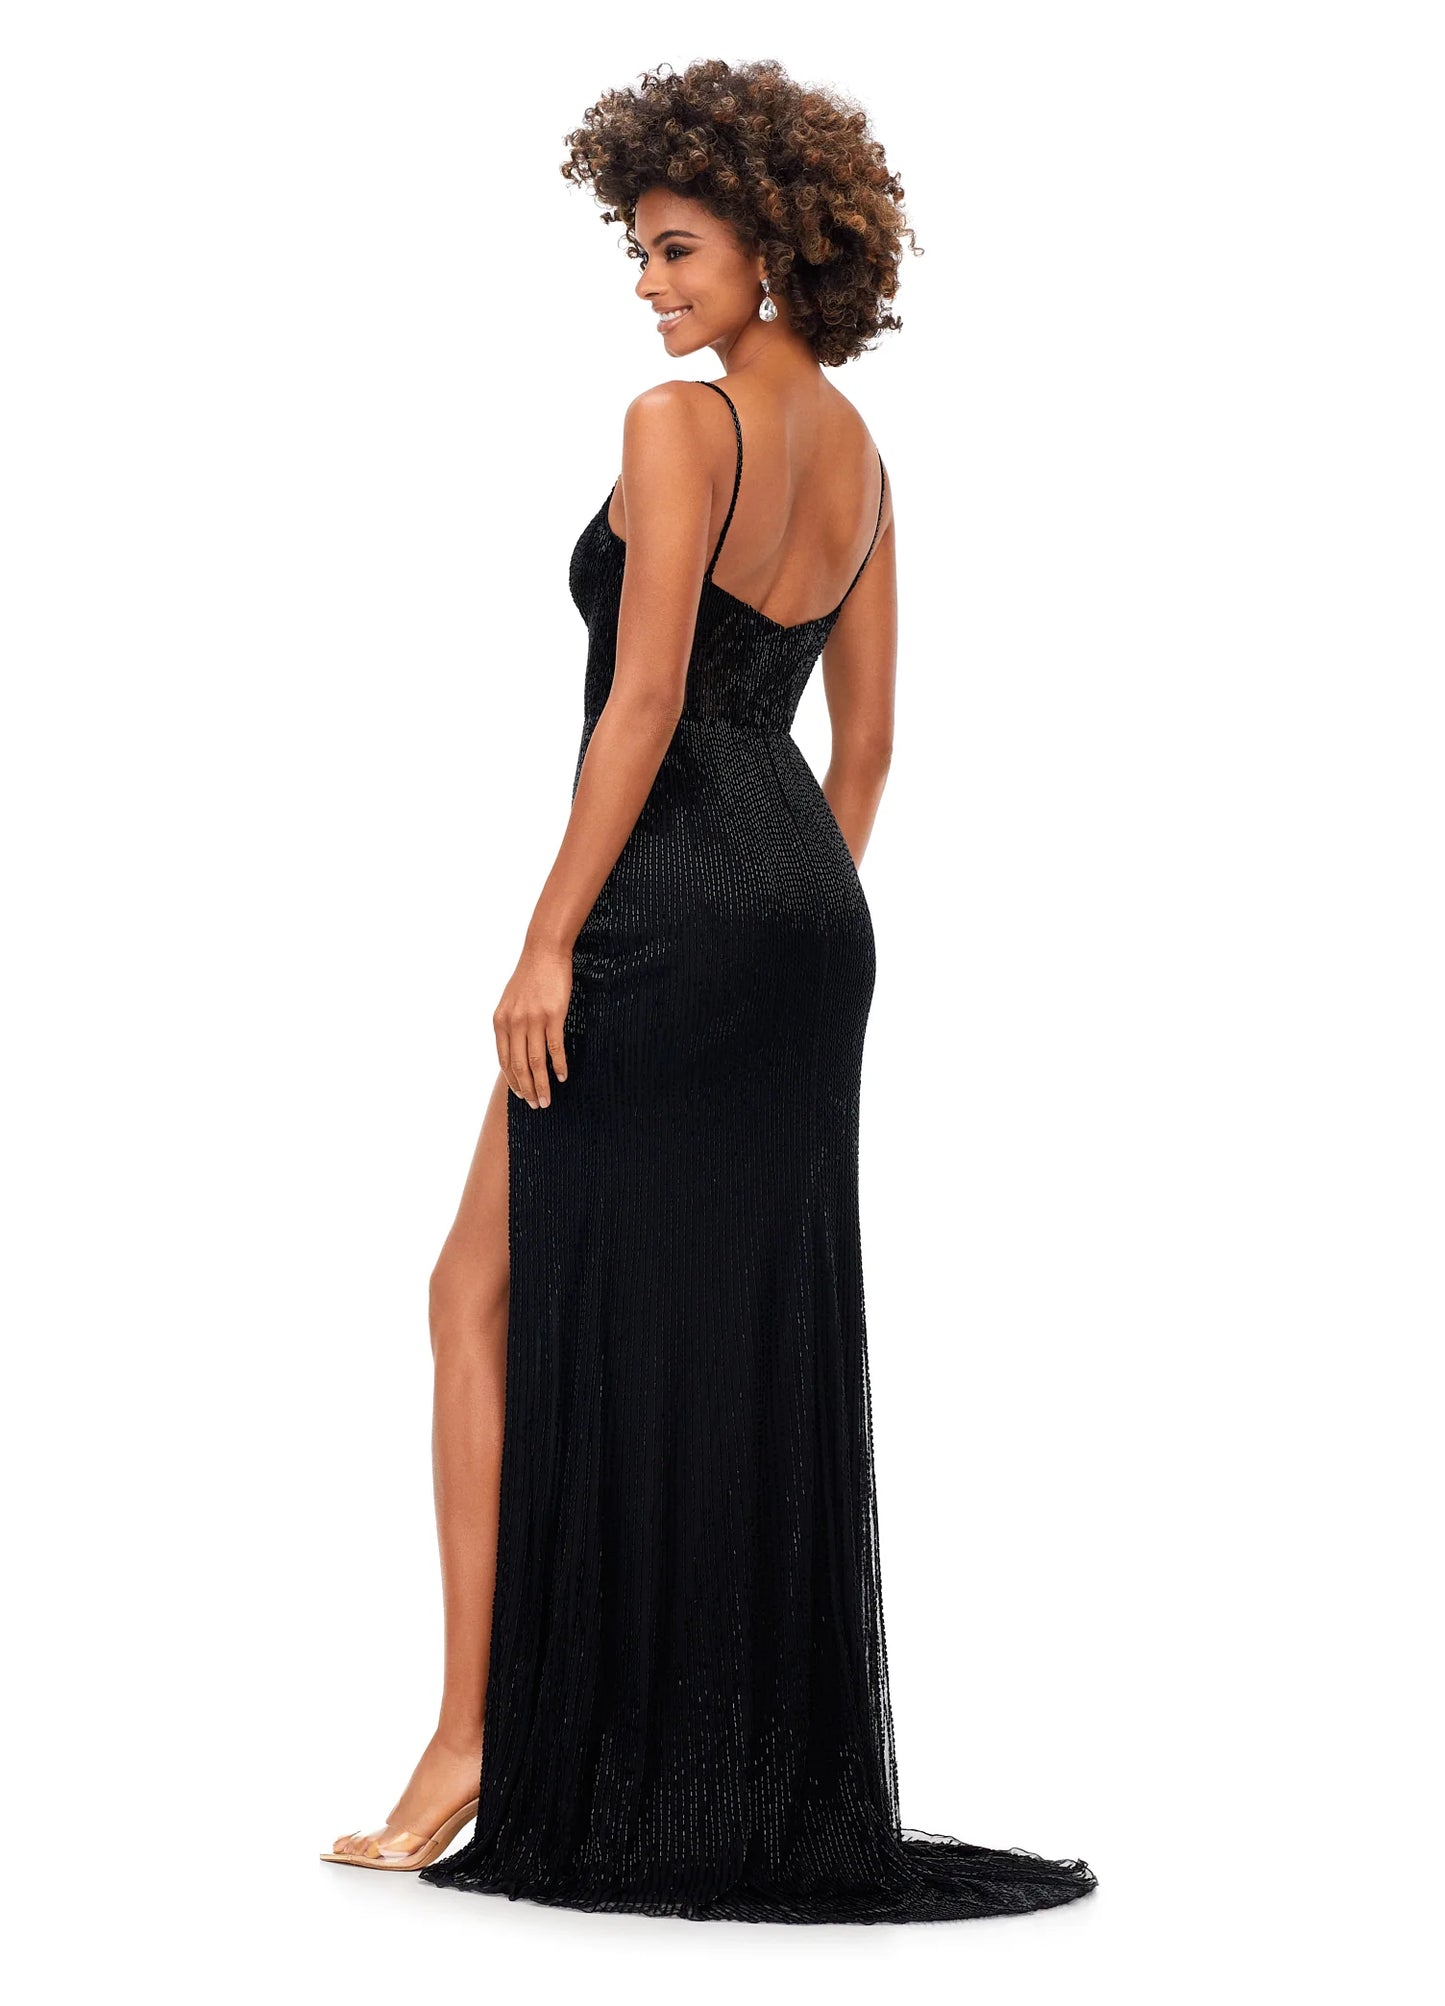 Ashley Lauren 11369 This liquid beaded style features an exposed bustier that is sure to accentuate your curves. The look is complete with sweep train and left leg slit. Spaghetti Straps Exposed Bustier Left Leg Slit Fully Liquid Beading Size: 4, 8   Color: BLACK